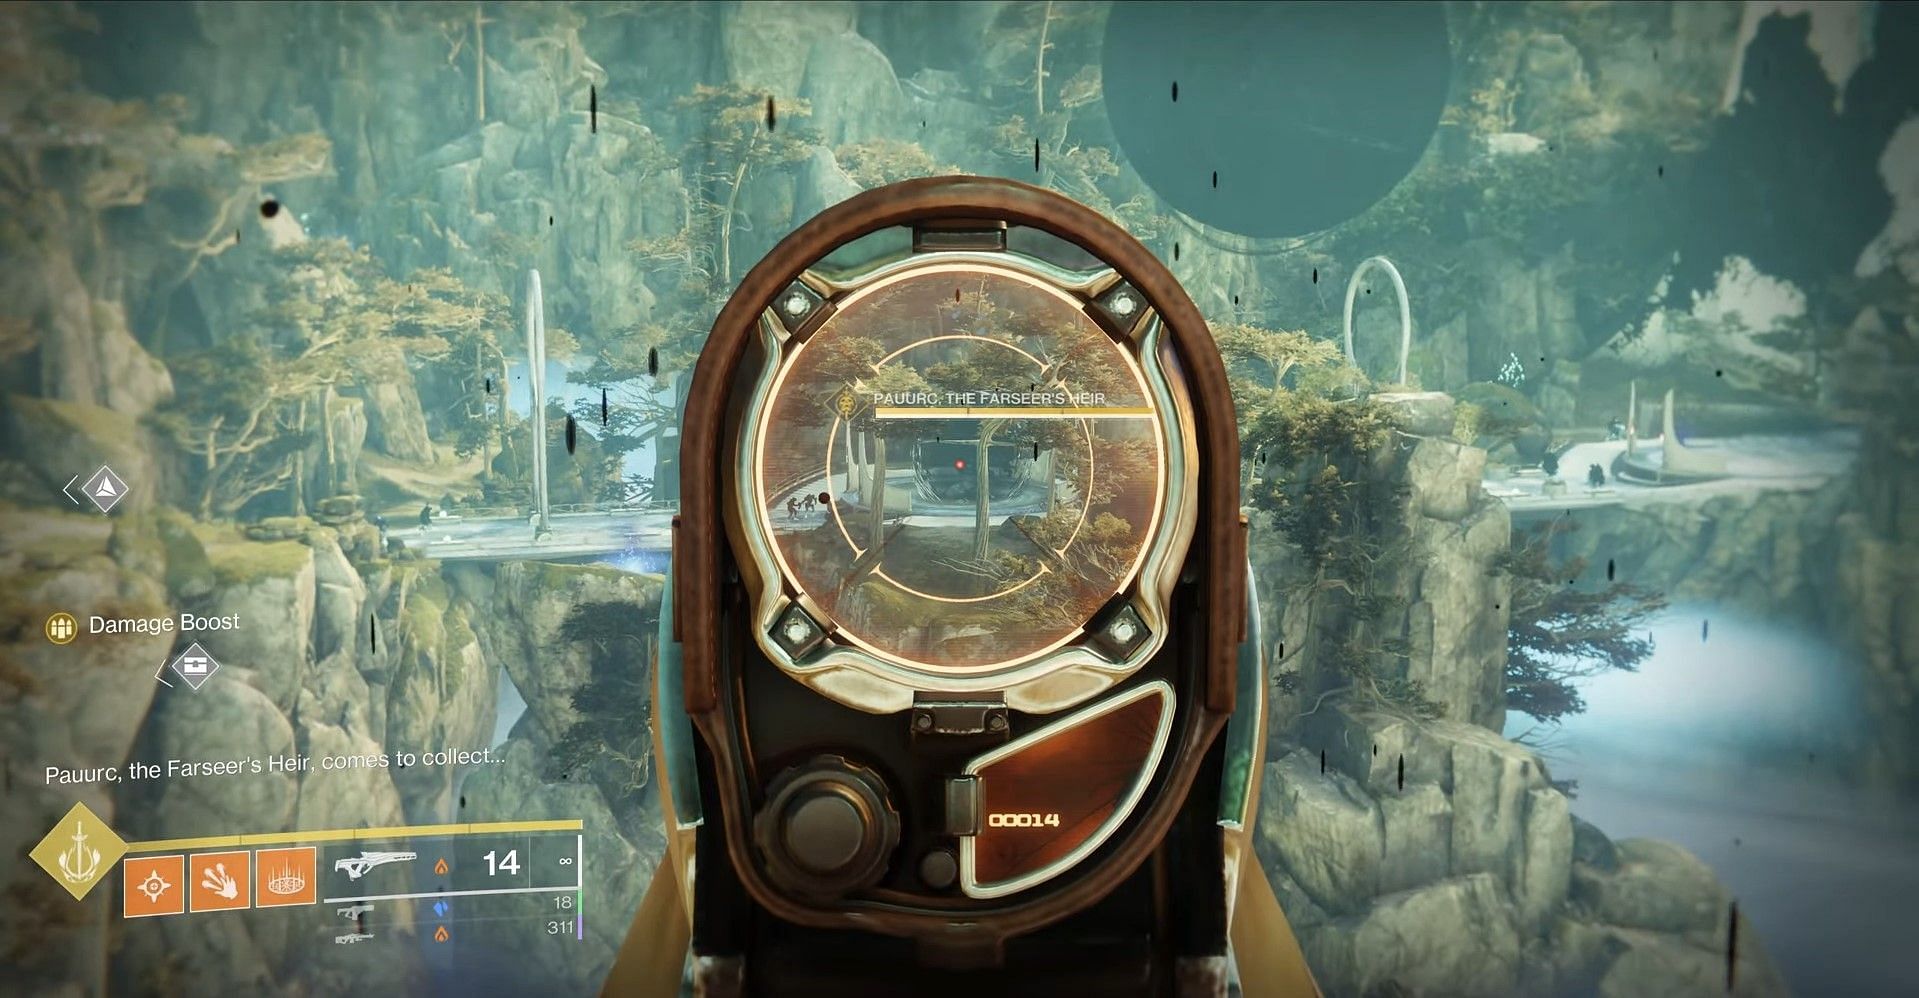 Pauurc spawned in the middle of the bridge (Image via Bungie)